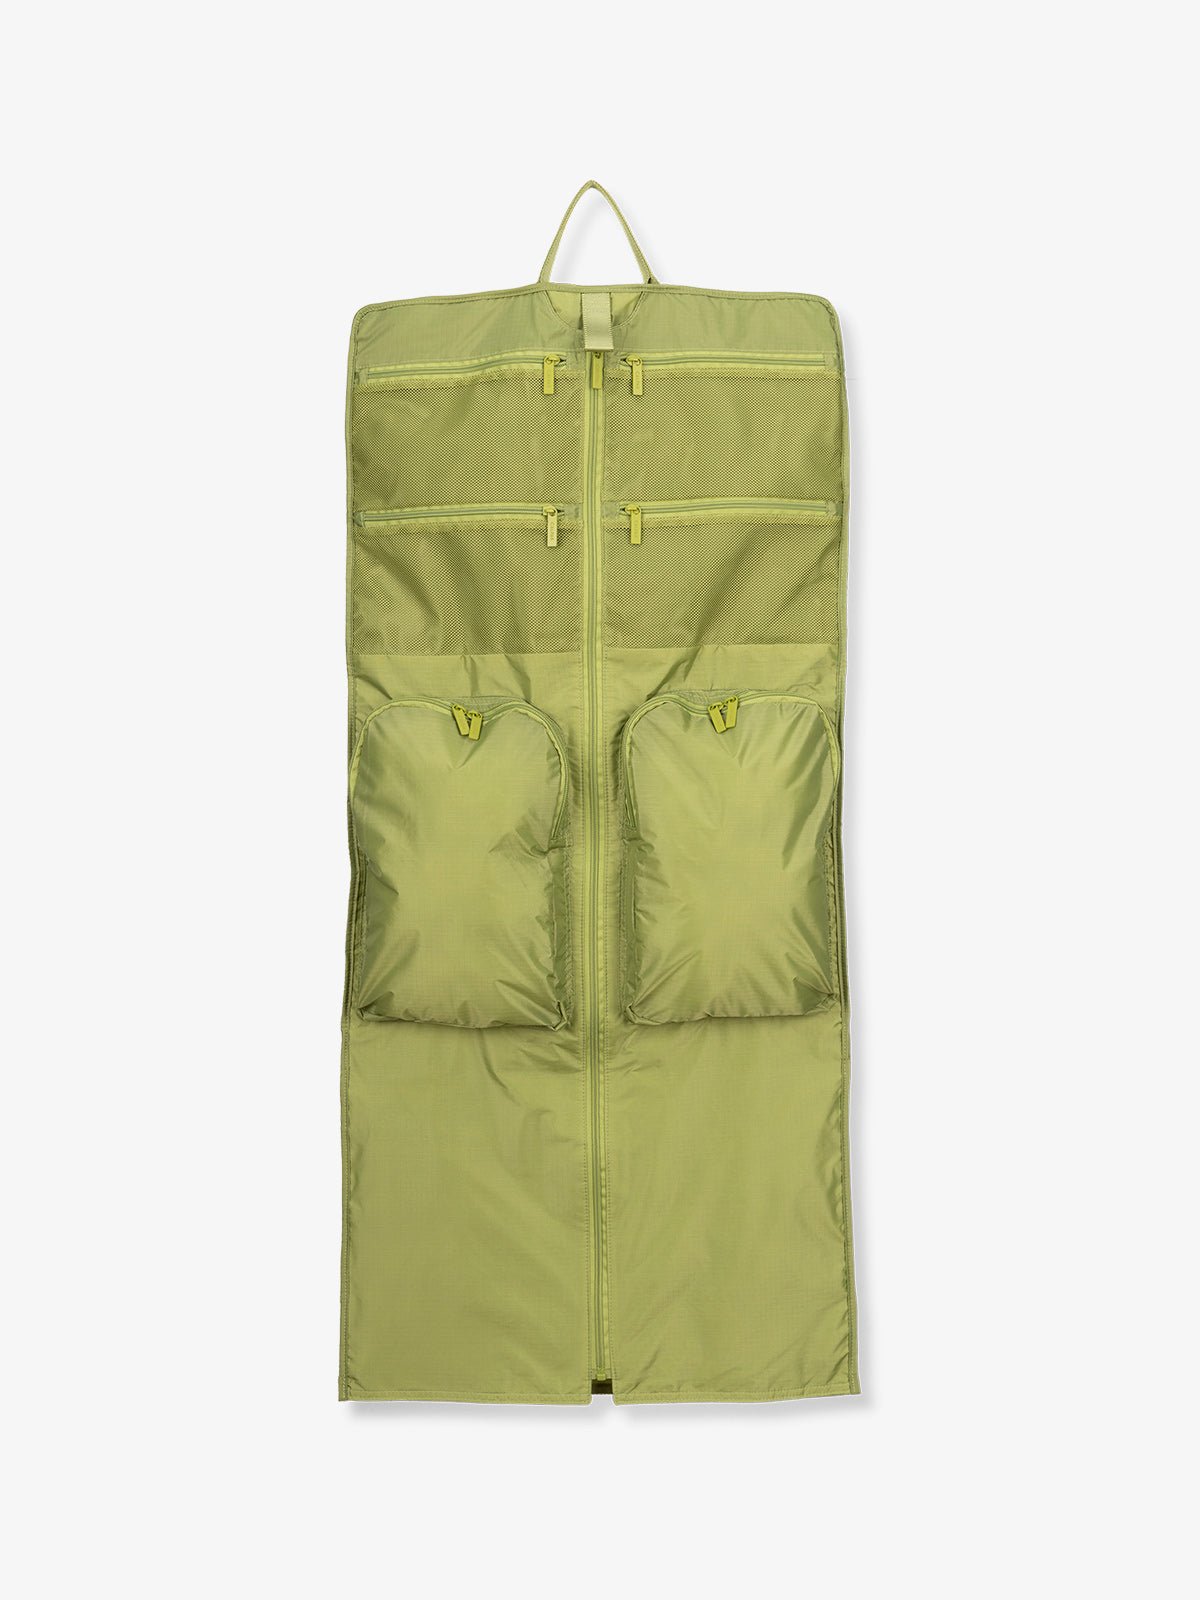 CALPAK Compakt small carry on garment bag made with water resistant ripstop nylon and multiple pockets in palm green